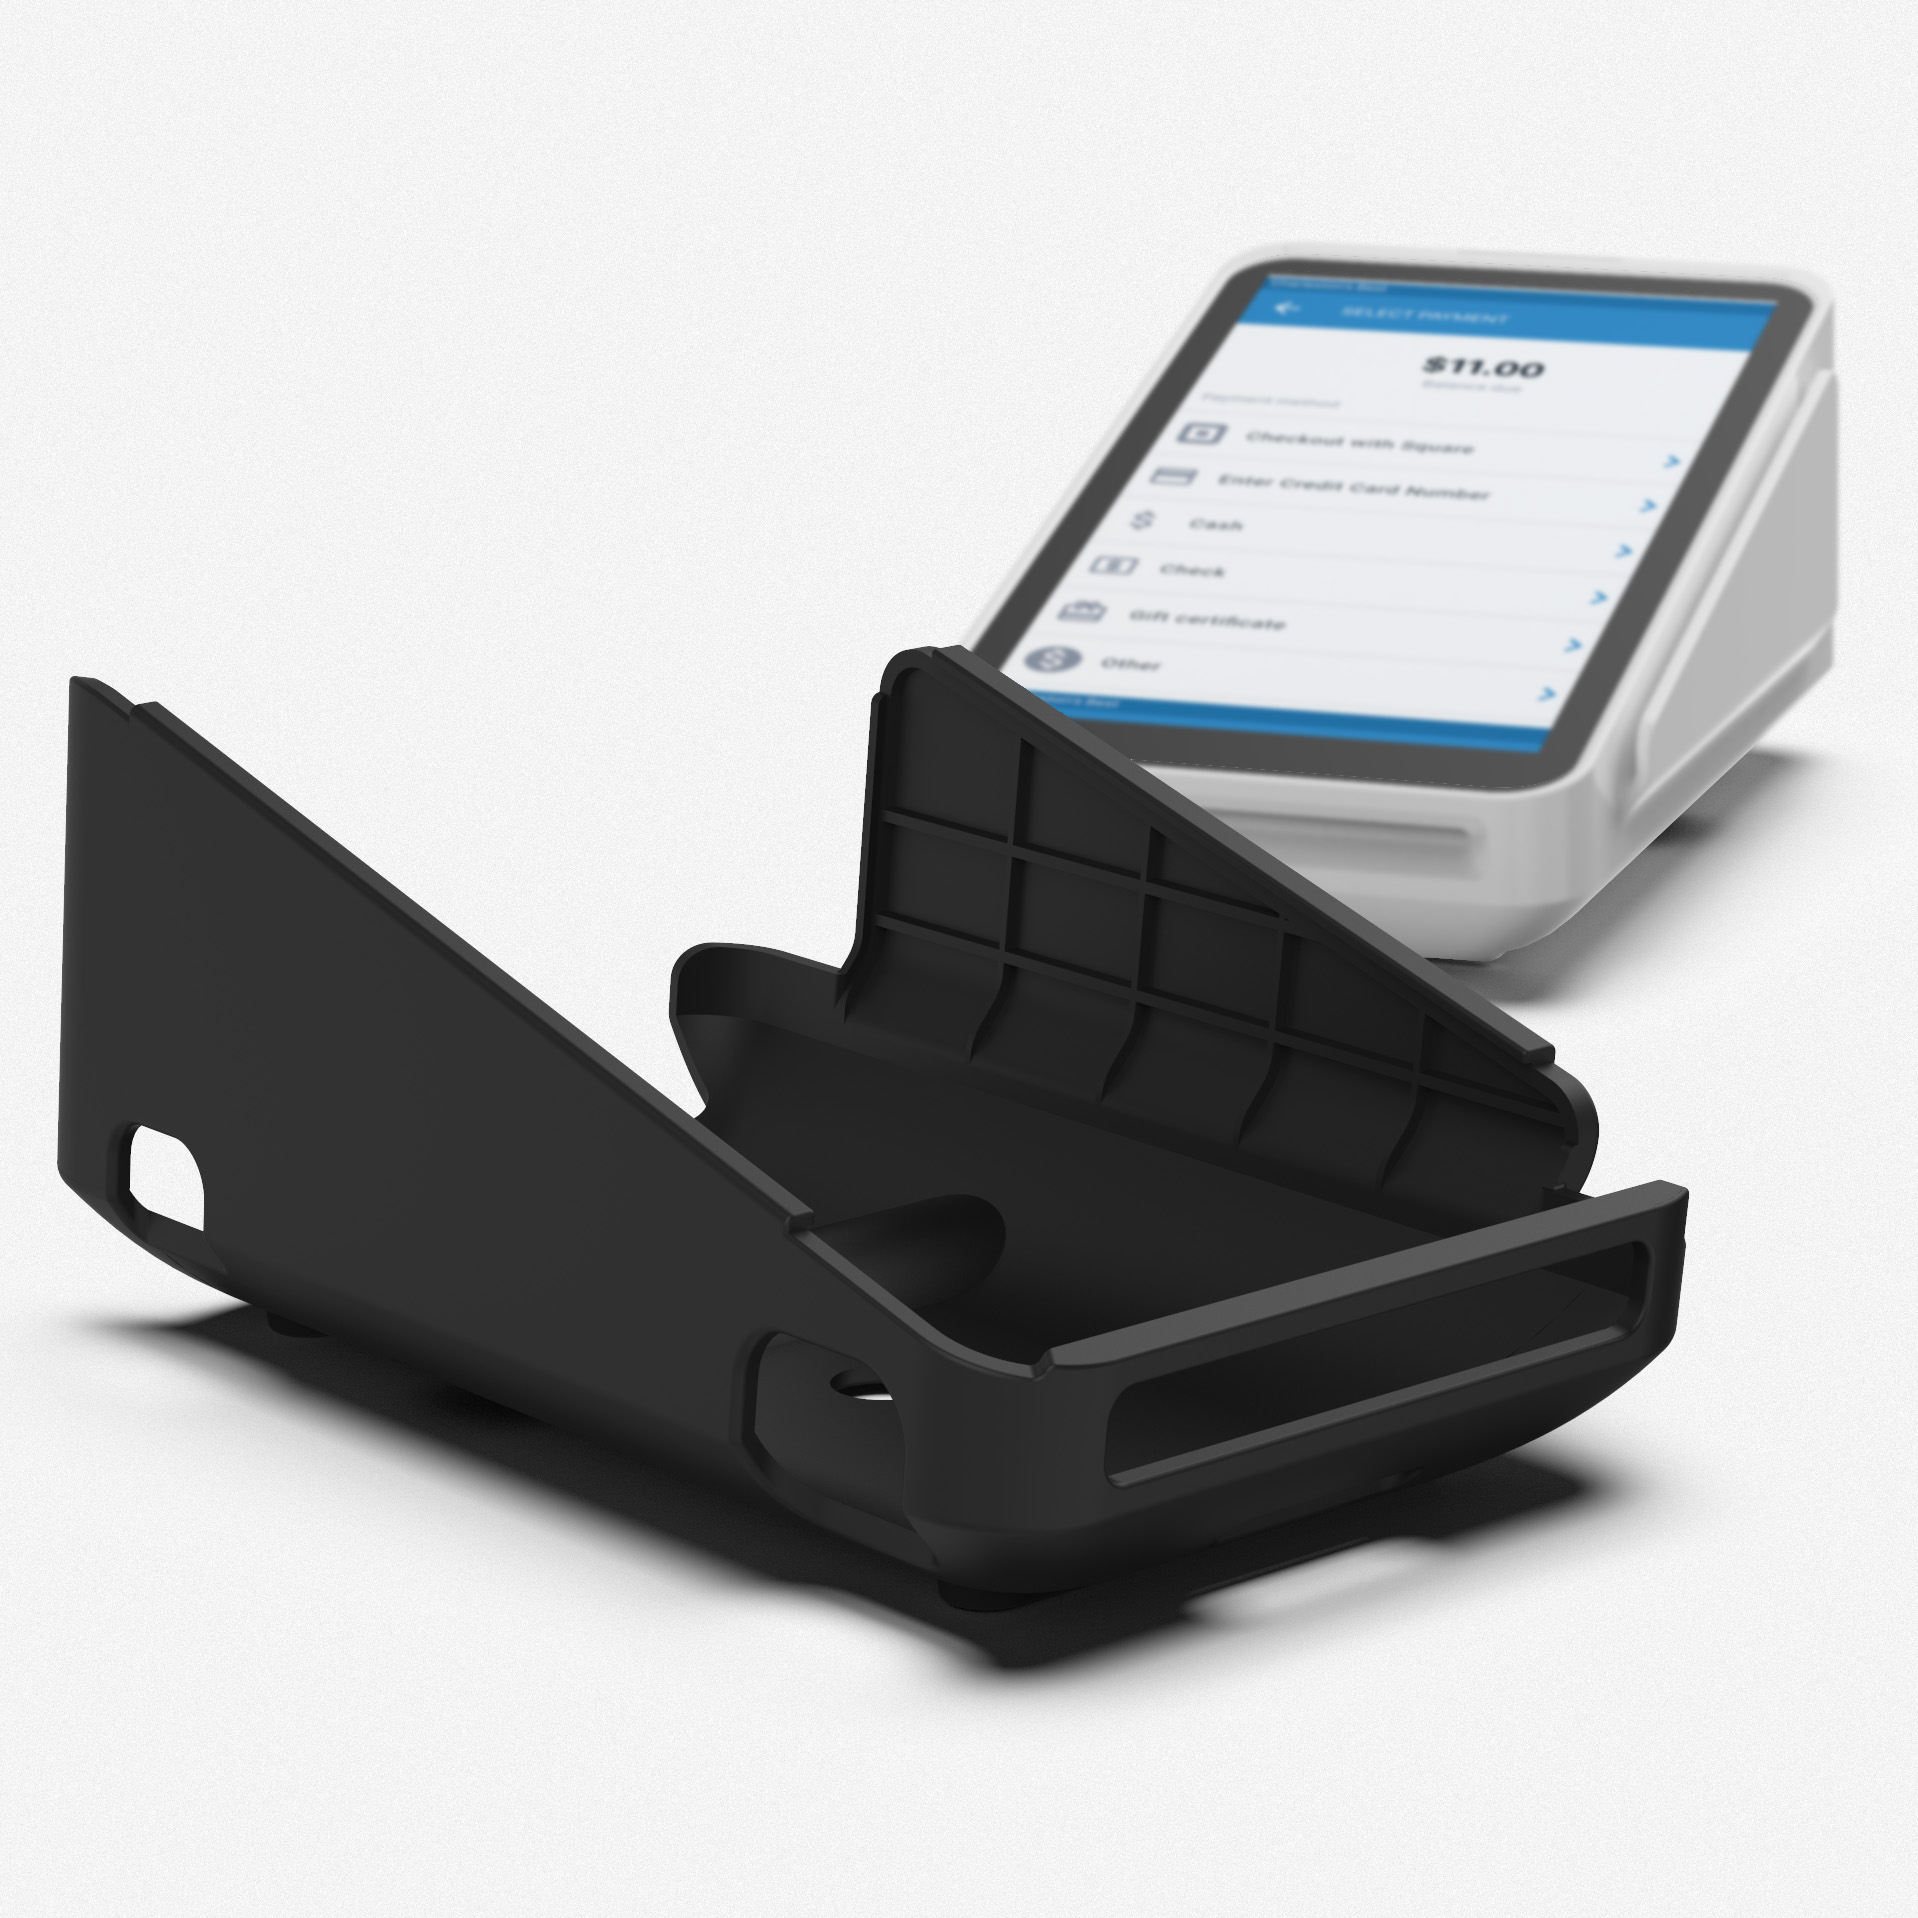 Square Terminal Slimshield Case with Screen Protector - Encased